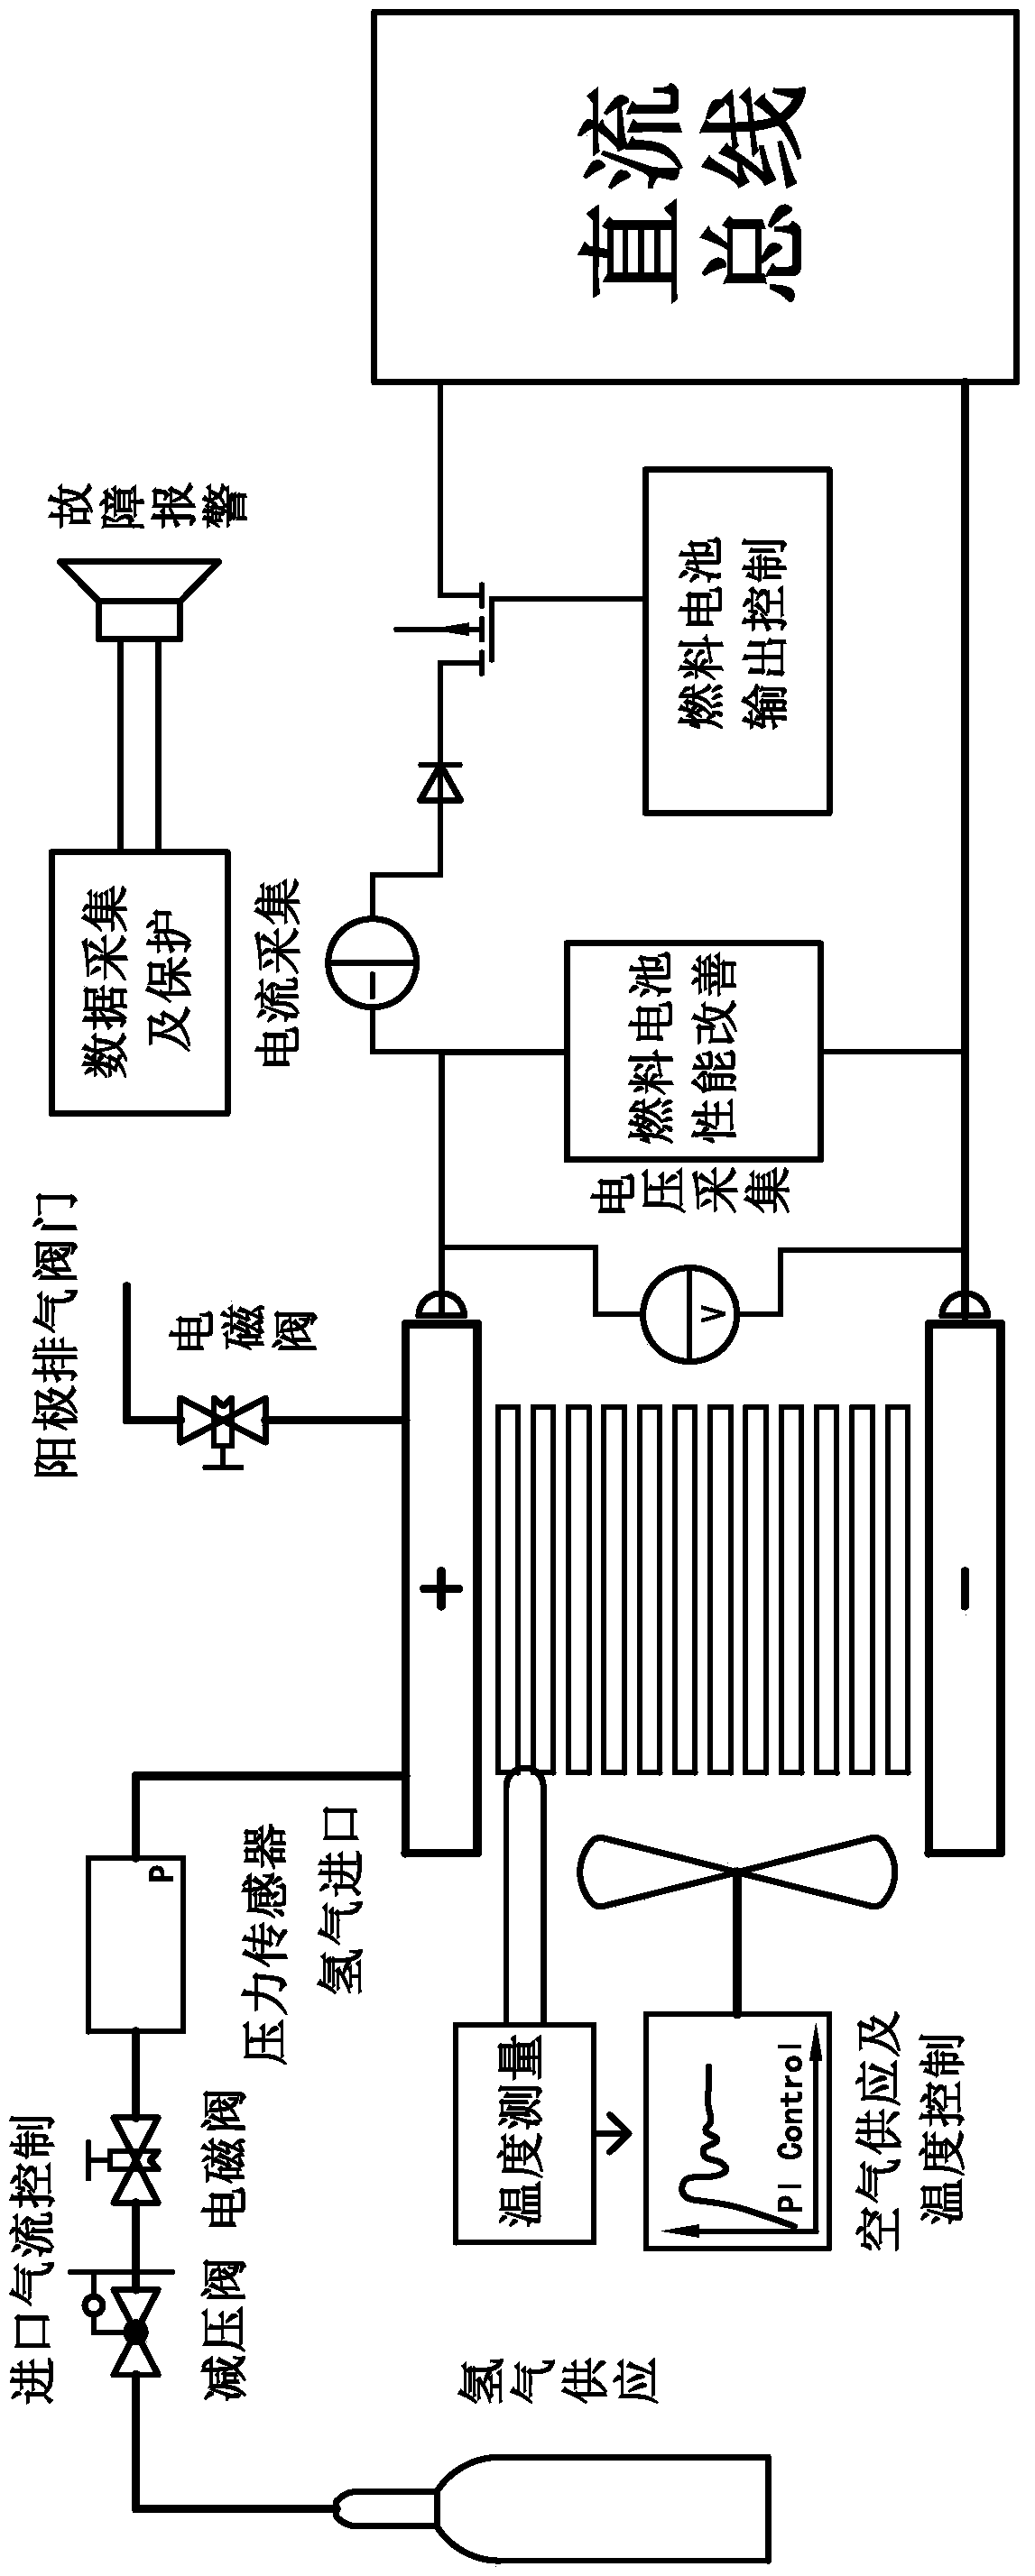 Fuel cell distributed control system and control method